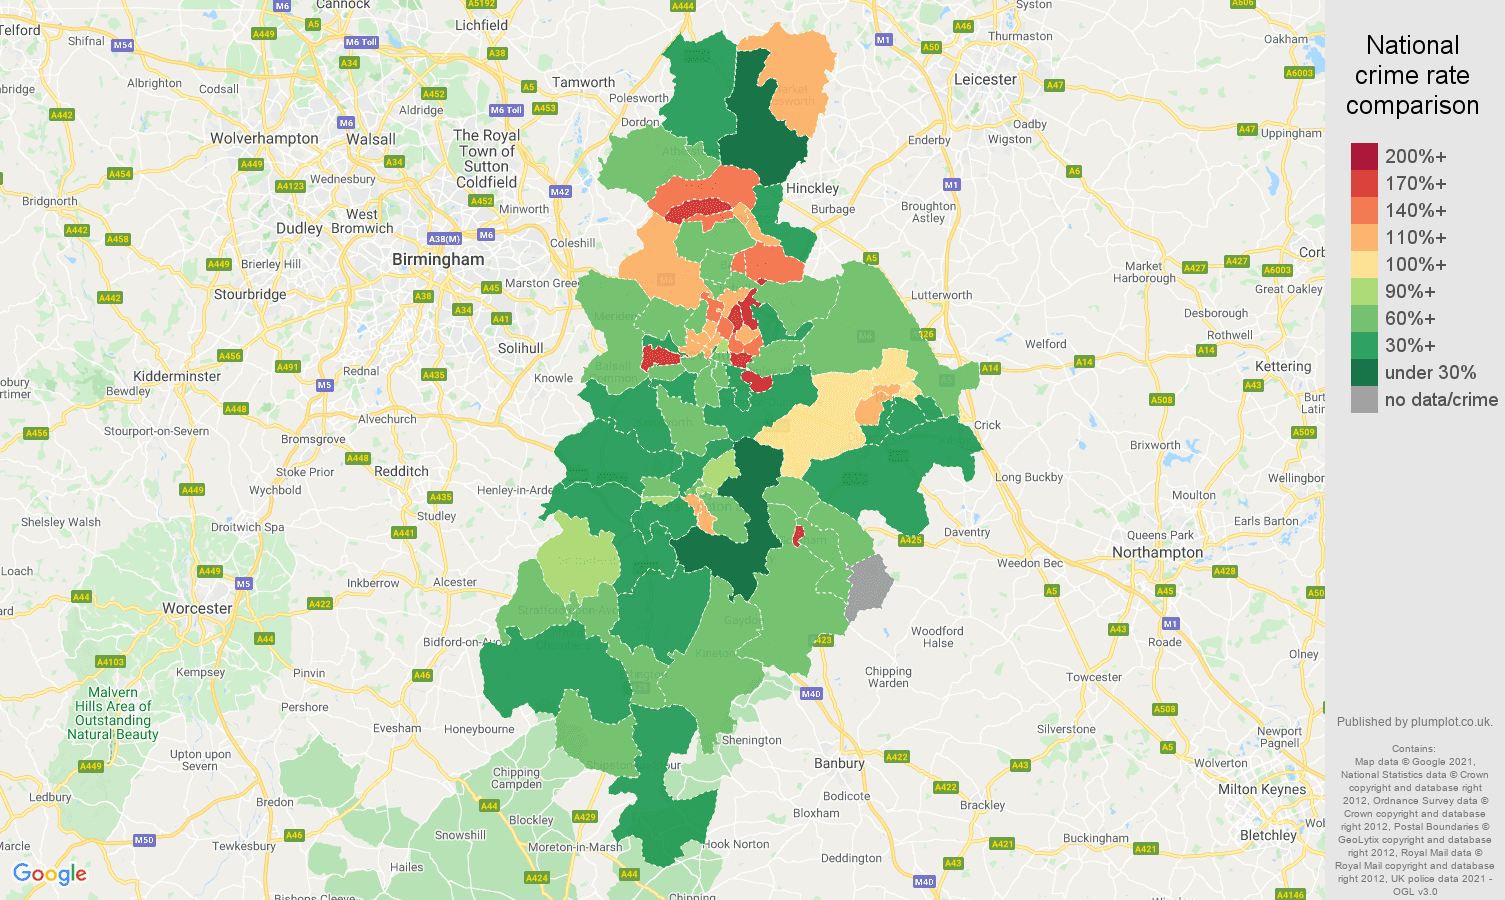 Coventry criminal damage and arson crime rate comparison map